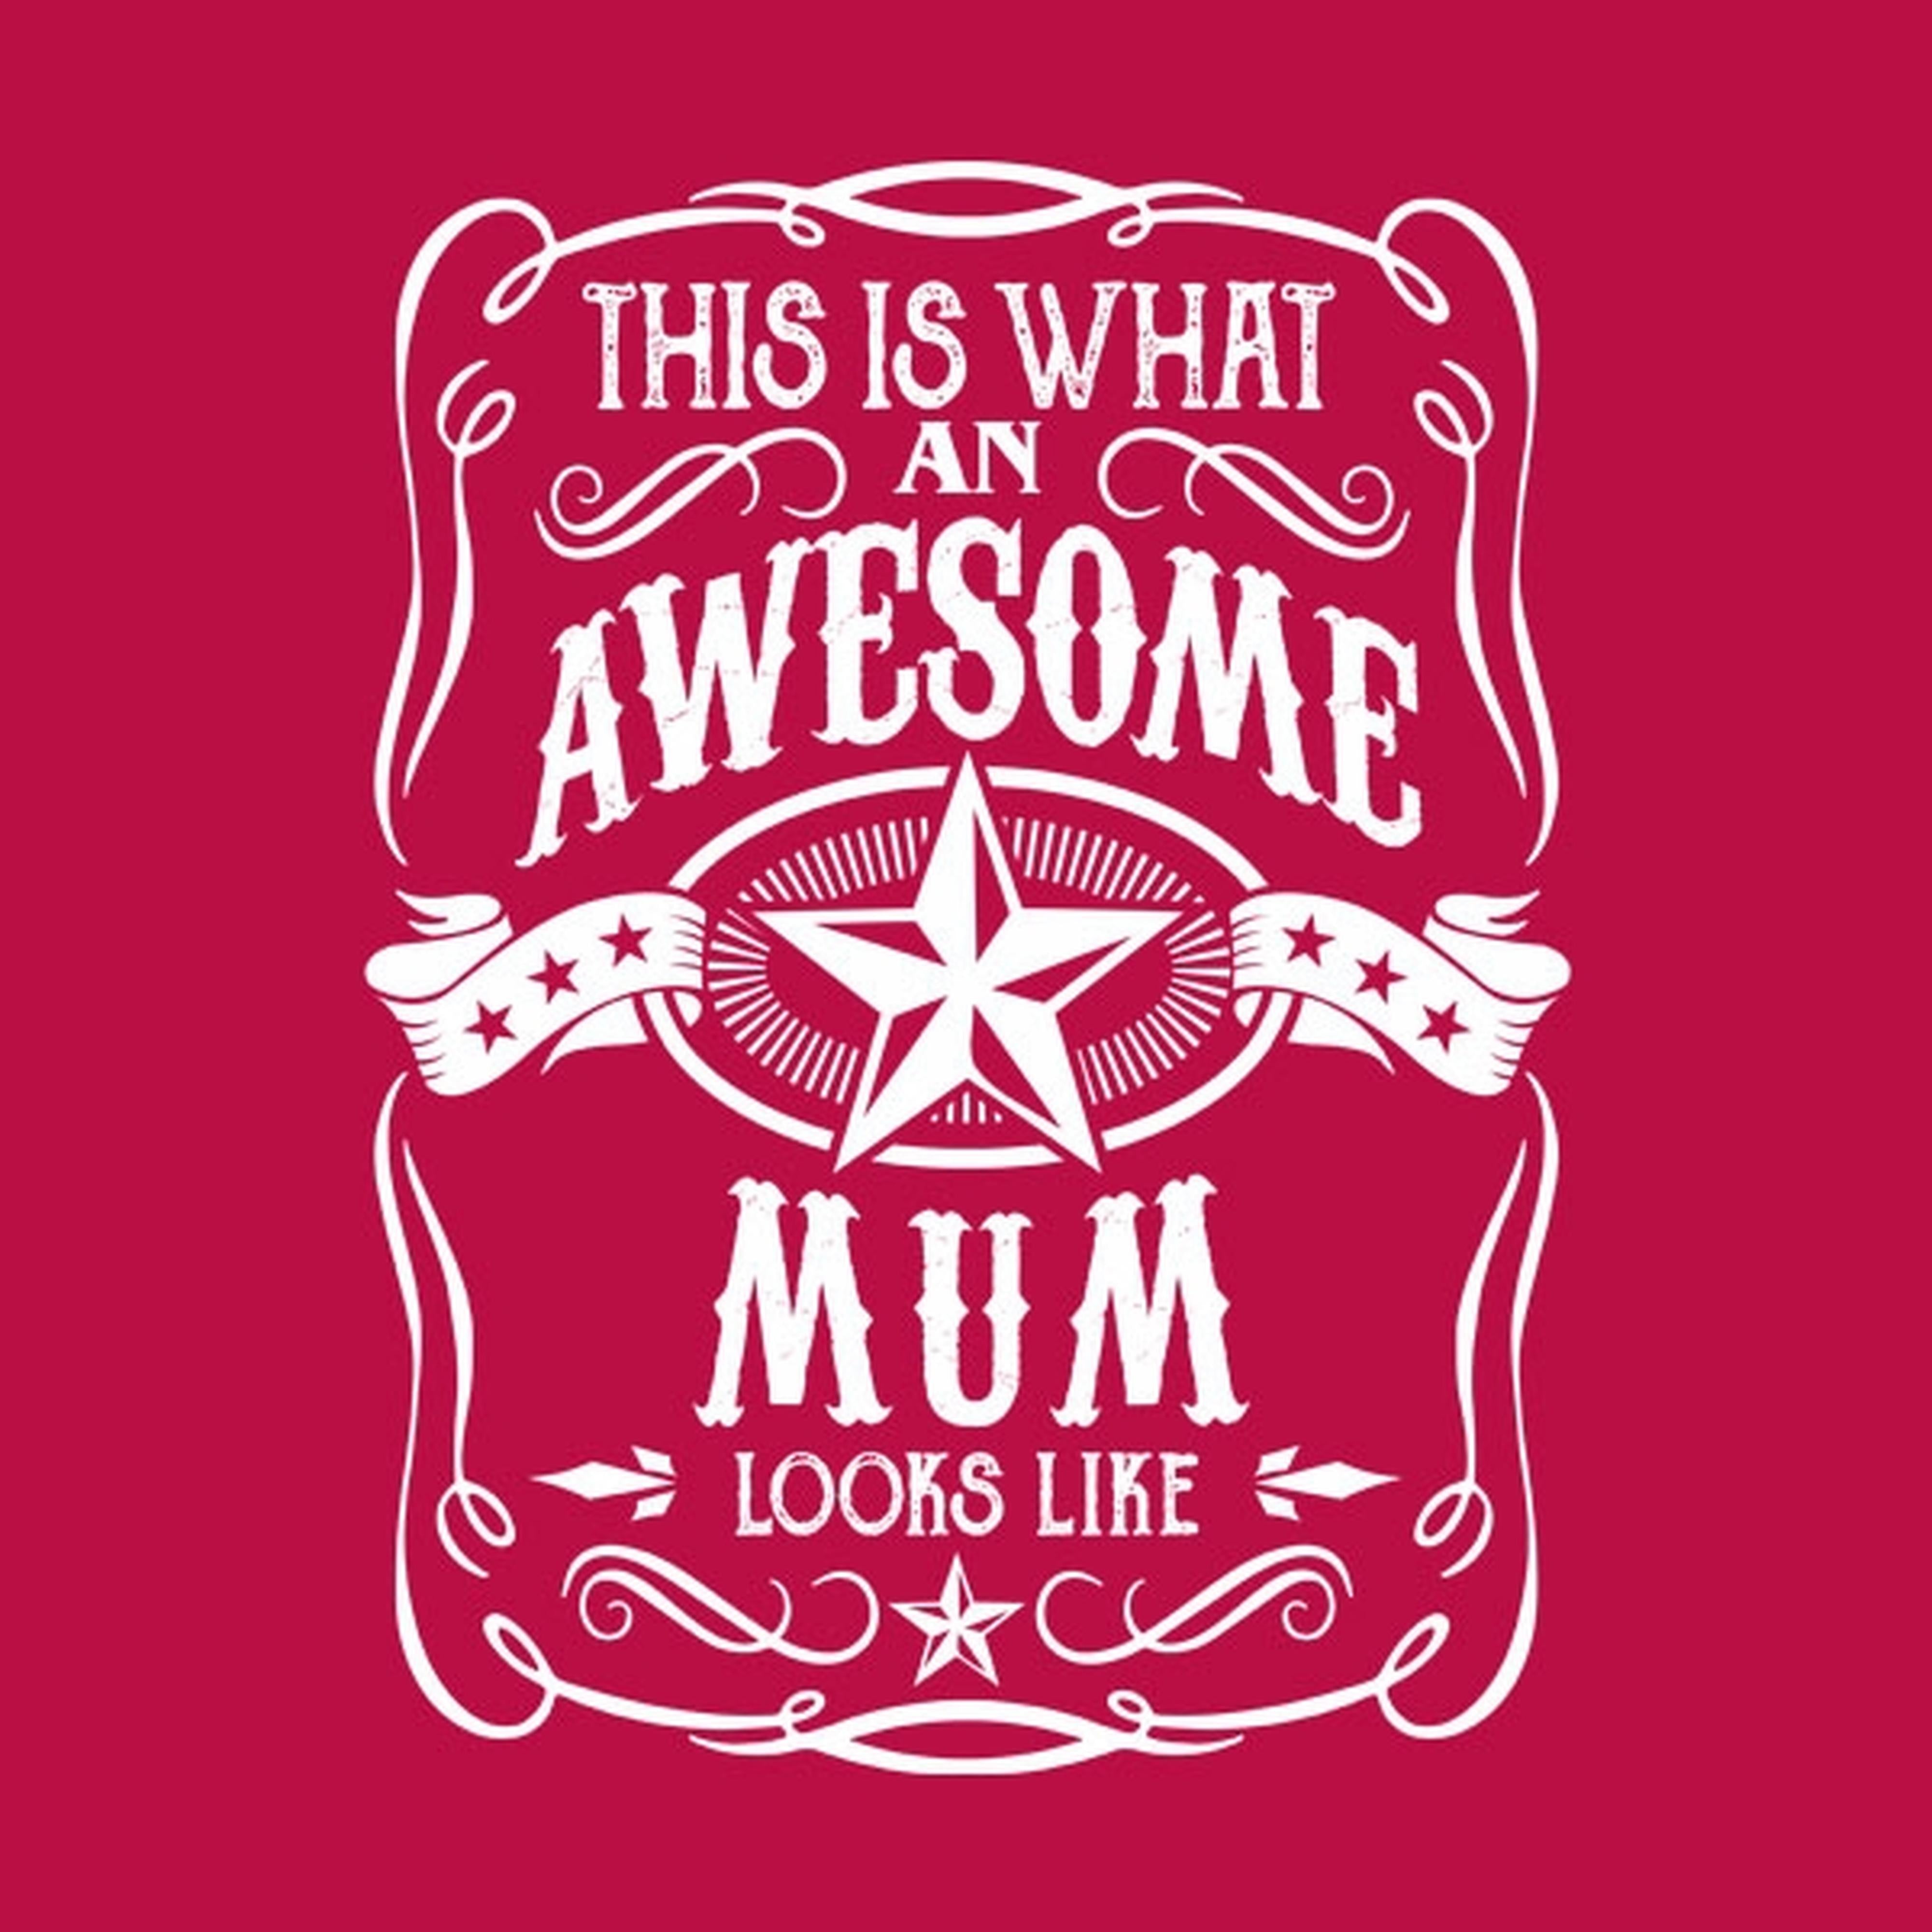 This is what an awesome mum looks like - T-shirt